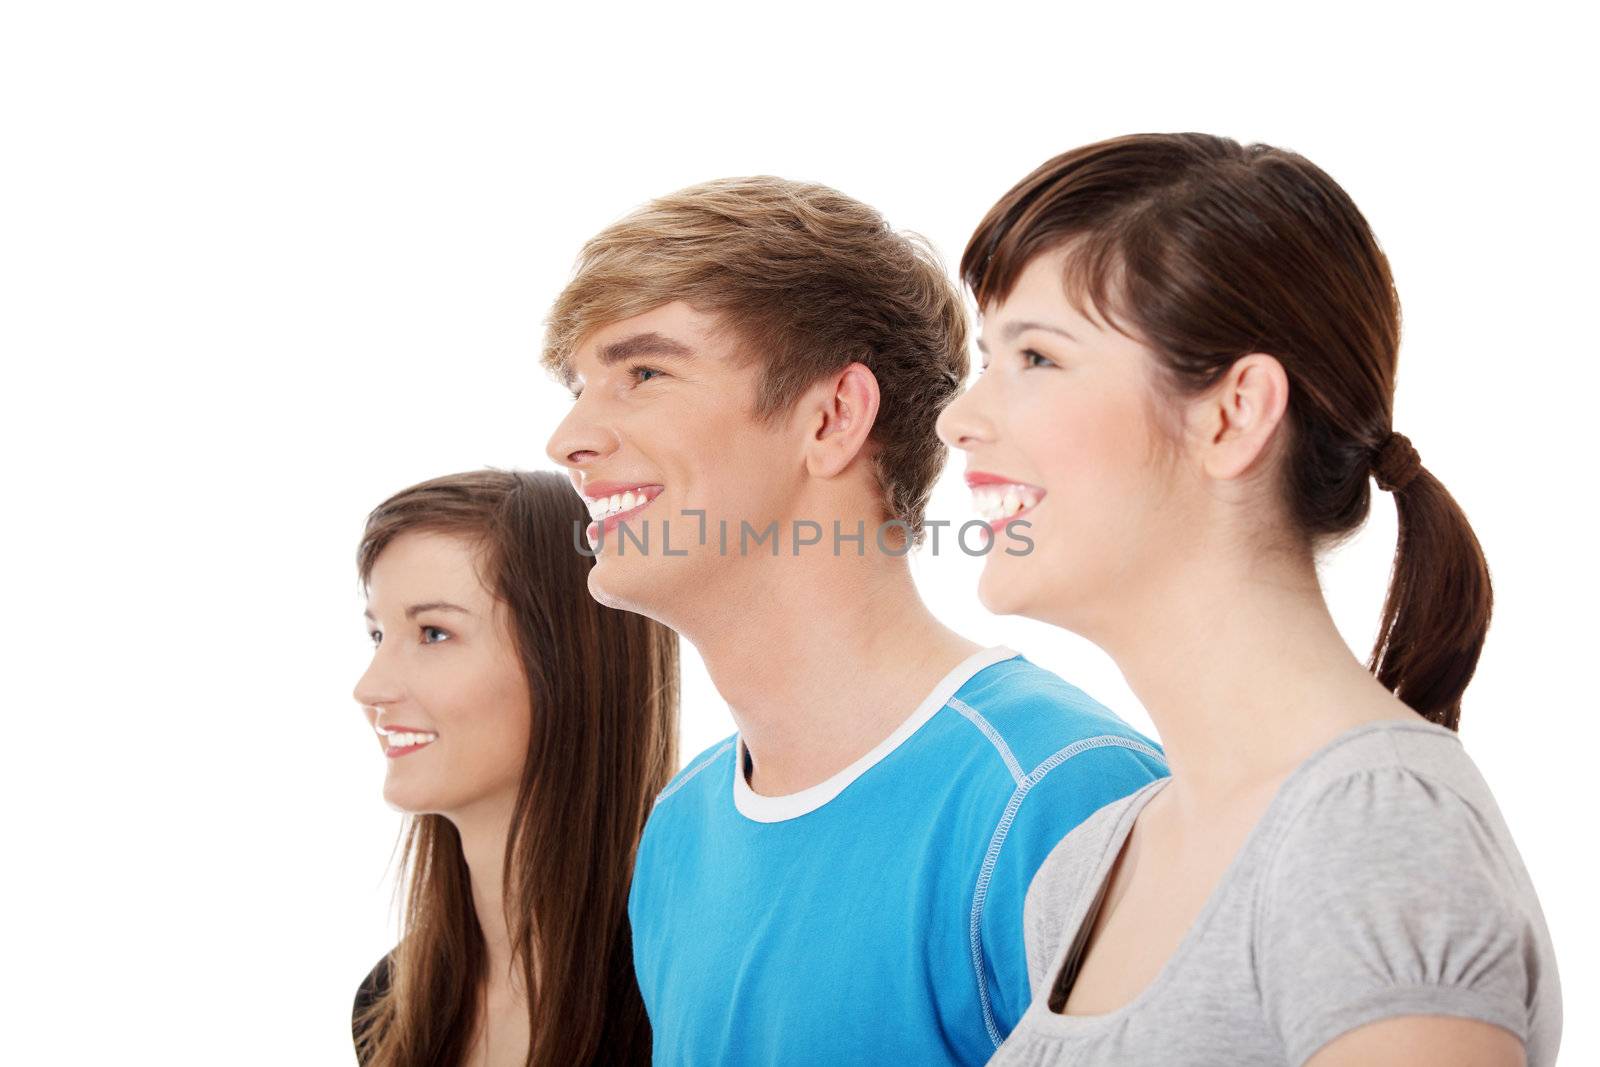 Three young happy friends. Two girls one boy smiling and looking left. Focus on male. Isolated on white background.